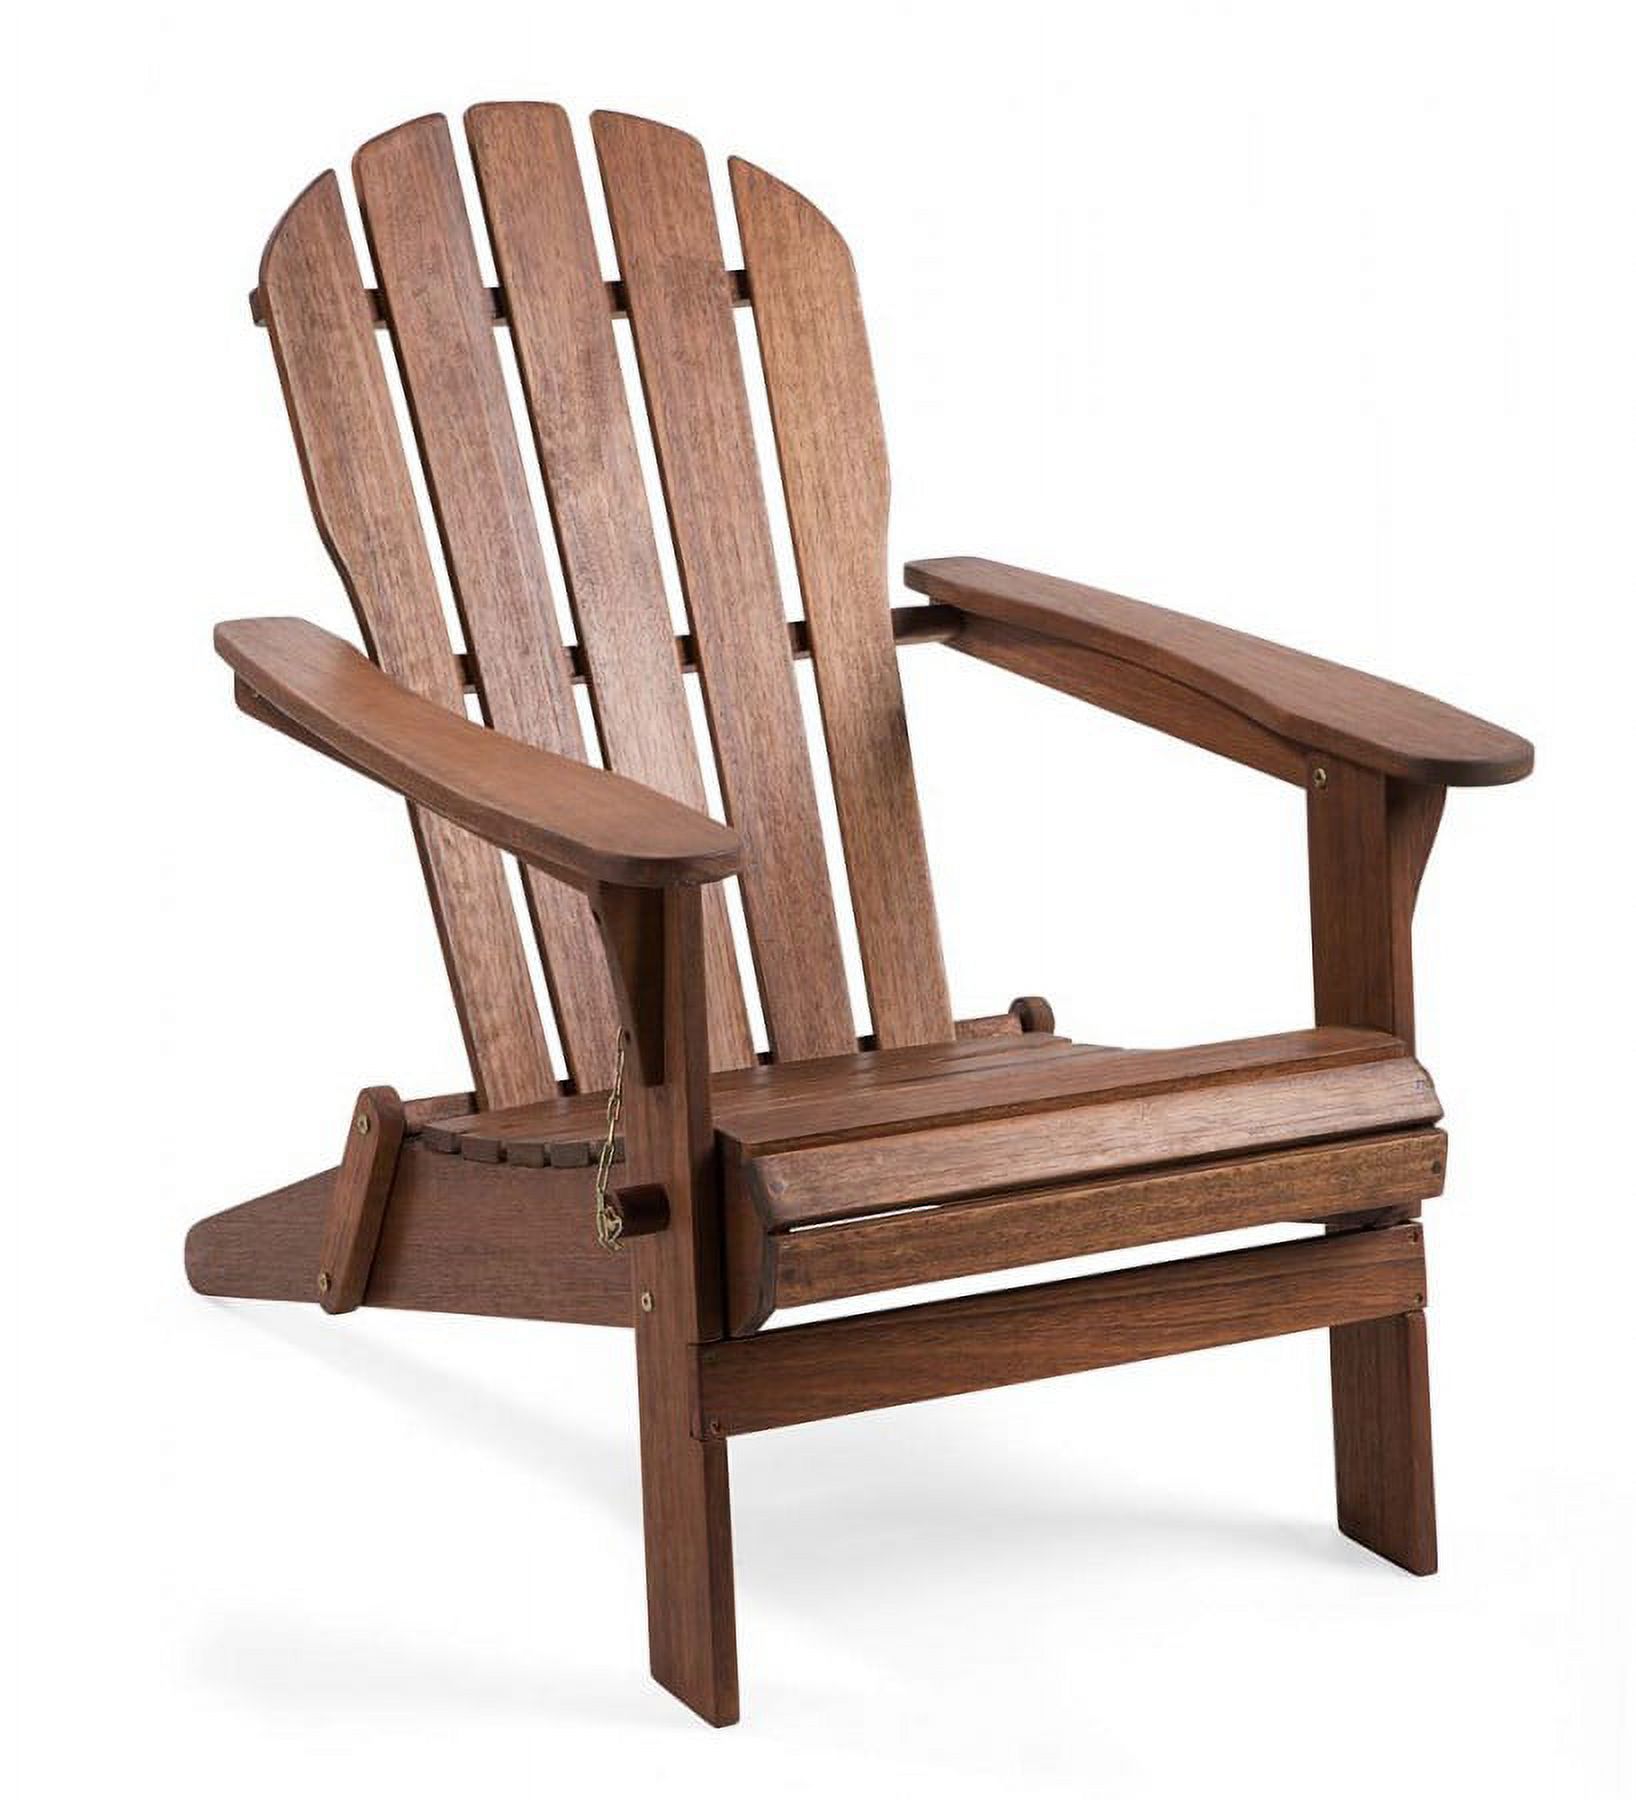 Plow & Hearth Wooden Adirondack Chair - Natural Stain - image 1 of 2